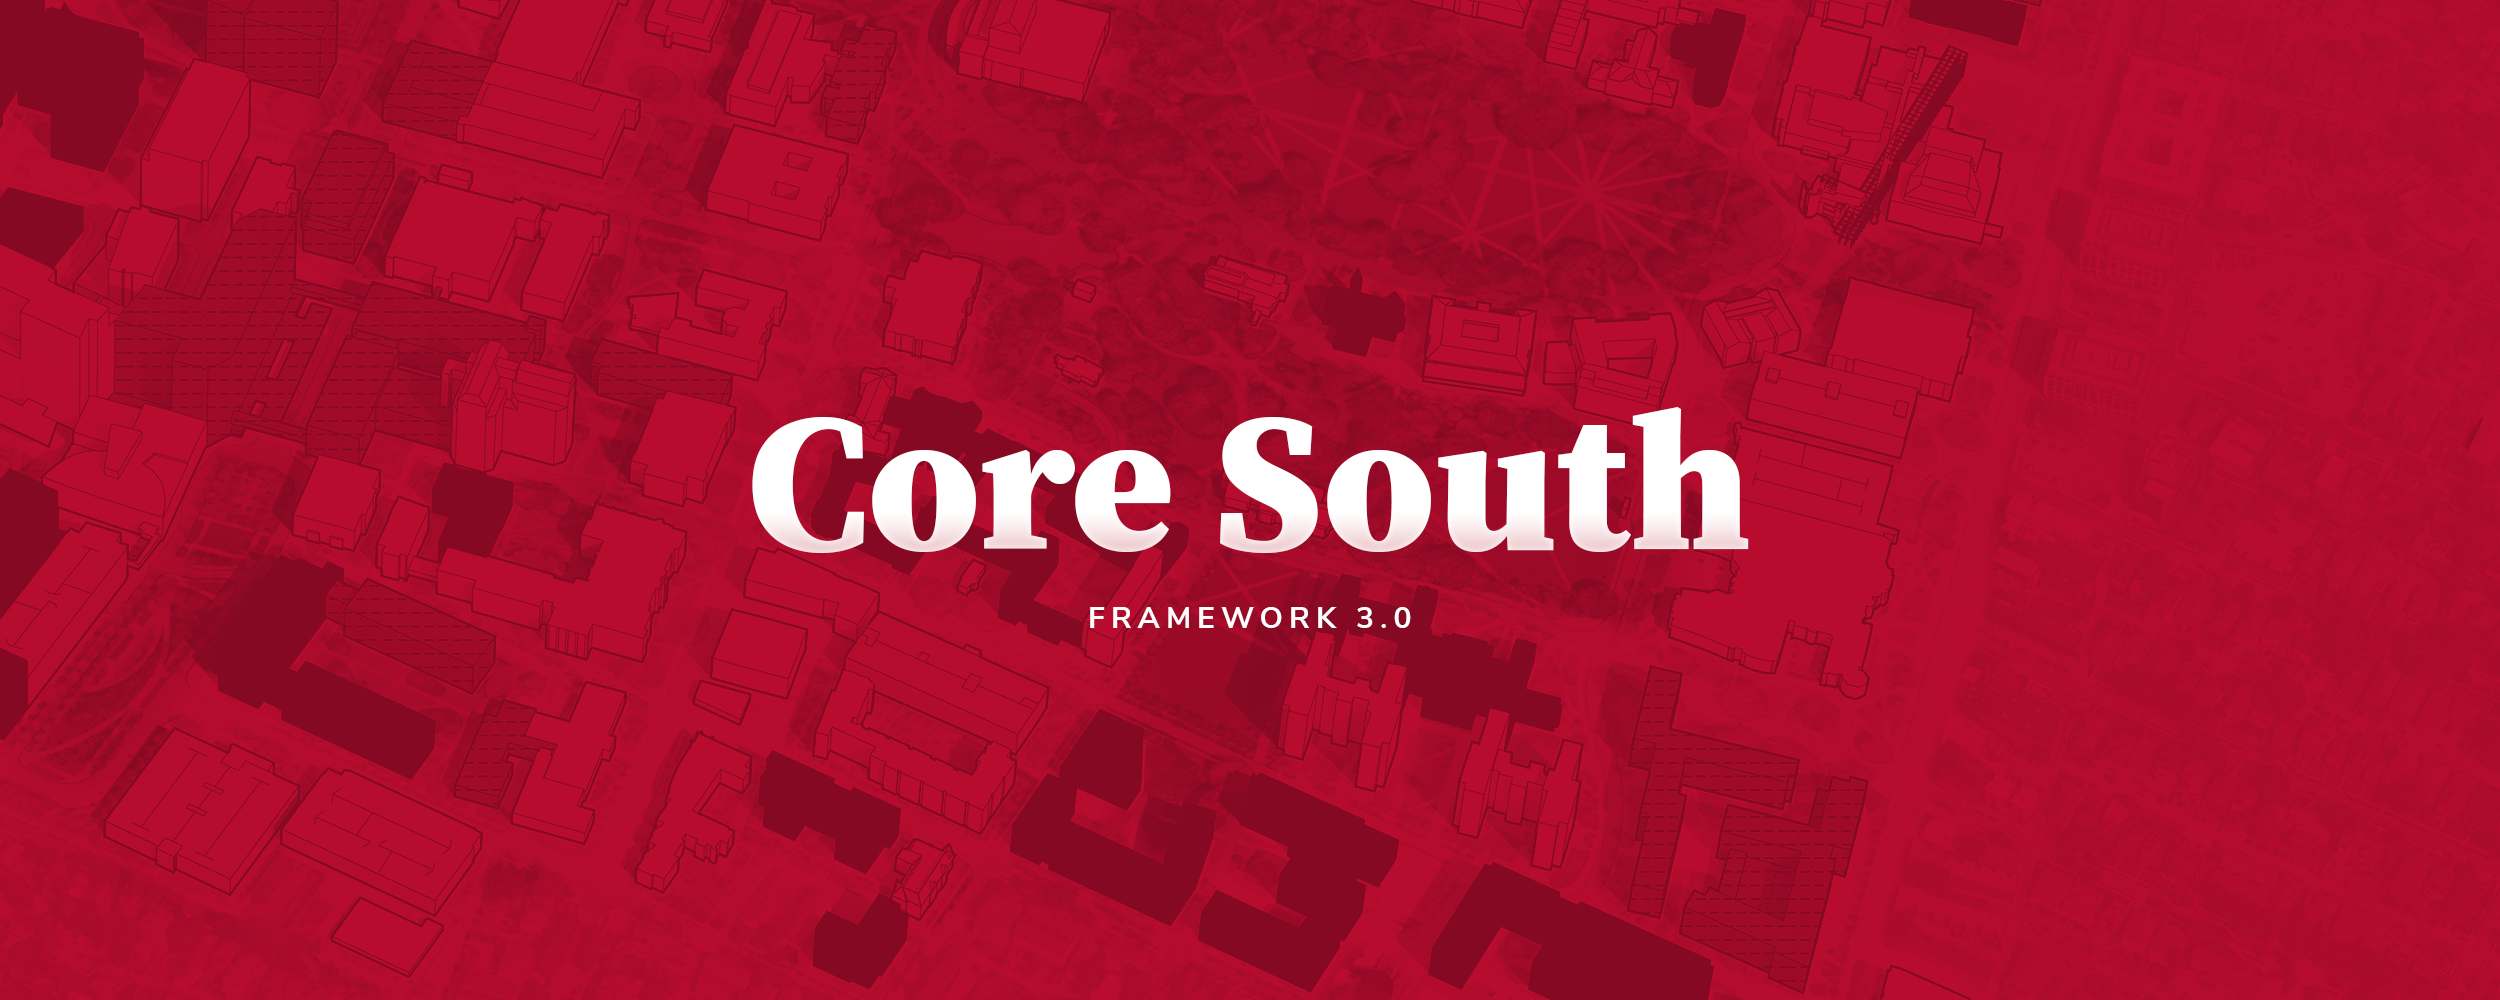 Banner image with text Core South - Framework 3.0